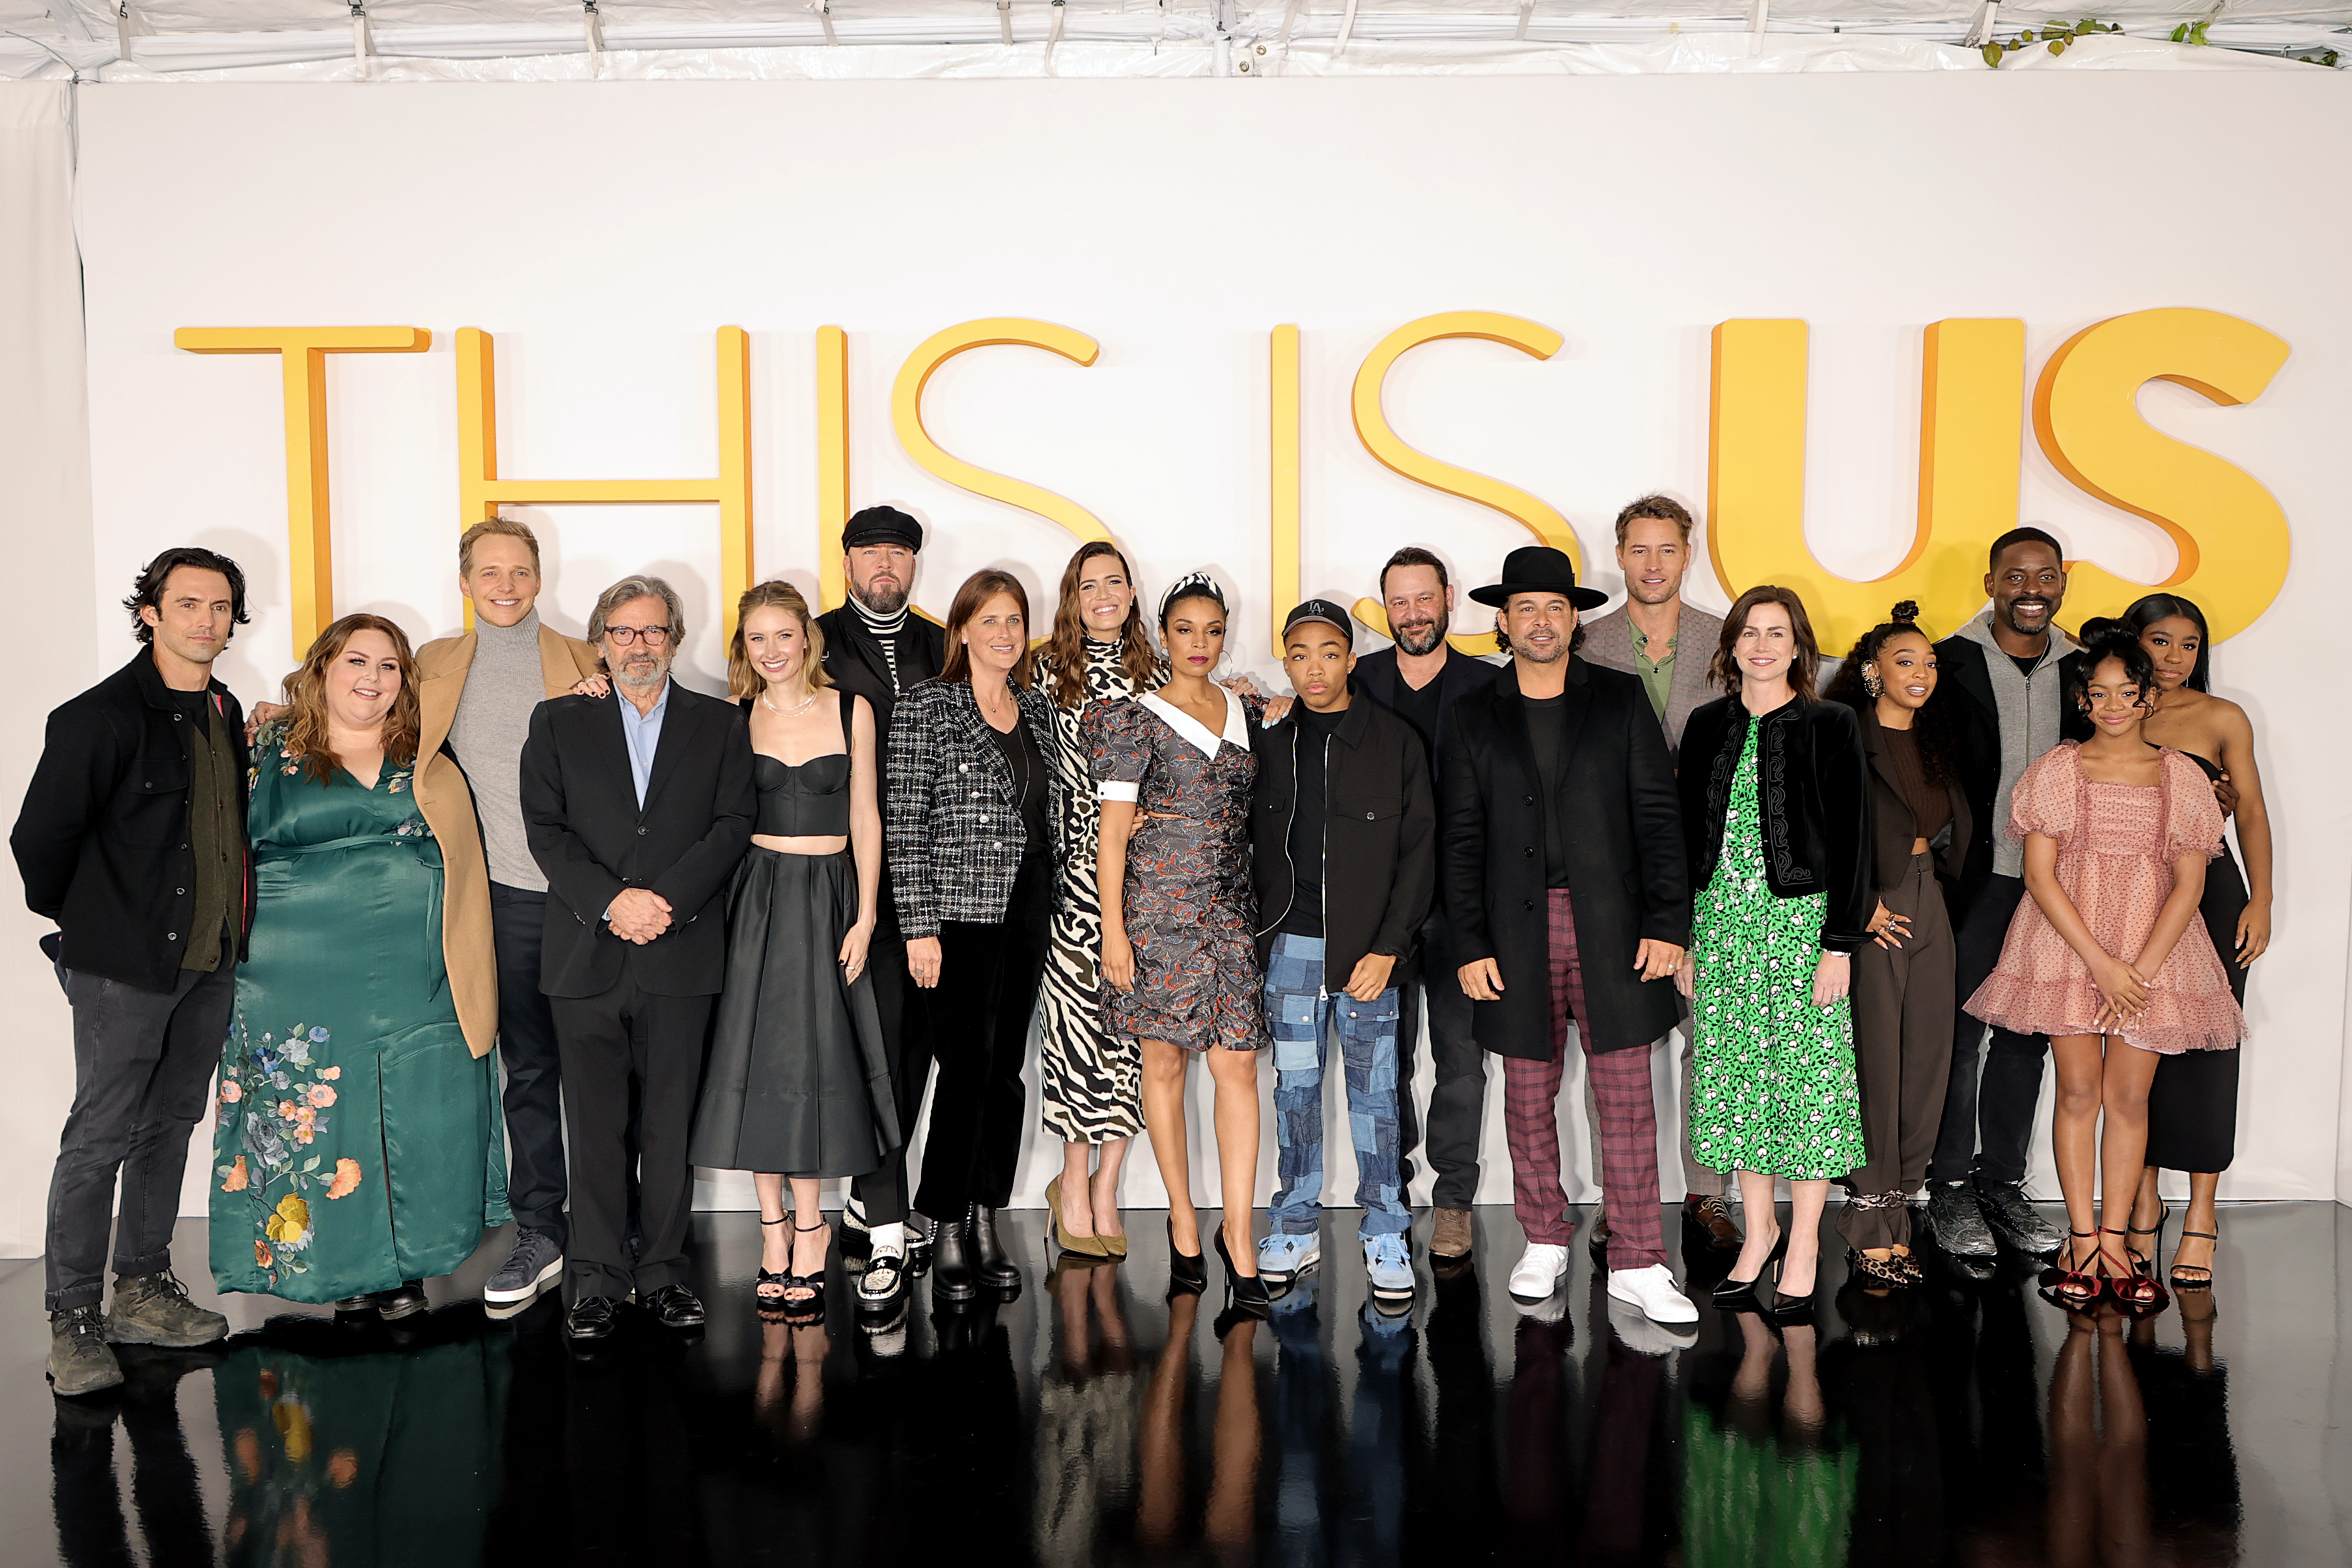 The 'This Is Us' cast and crew, including Milo Ventimiglia, Chrissy Metz, Chris Geere, Griffin Dunne, Caitlin Thompson, Chris Sullivan, Carolyn Cassidy, Mandy Moore, Susan Kelechi Watson, Asante Blackk, Dan Fogelman, Jon Huertas, Justin Hartley, Lisa Katz, Eris Baker, Sterling K. Brown, Faithe Herman, and Lyric Ross, pose for a group picture at the premiere of season 6.